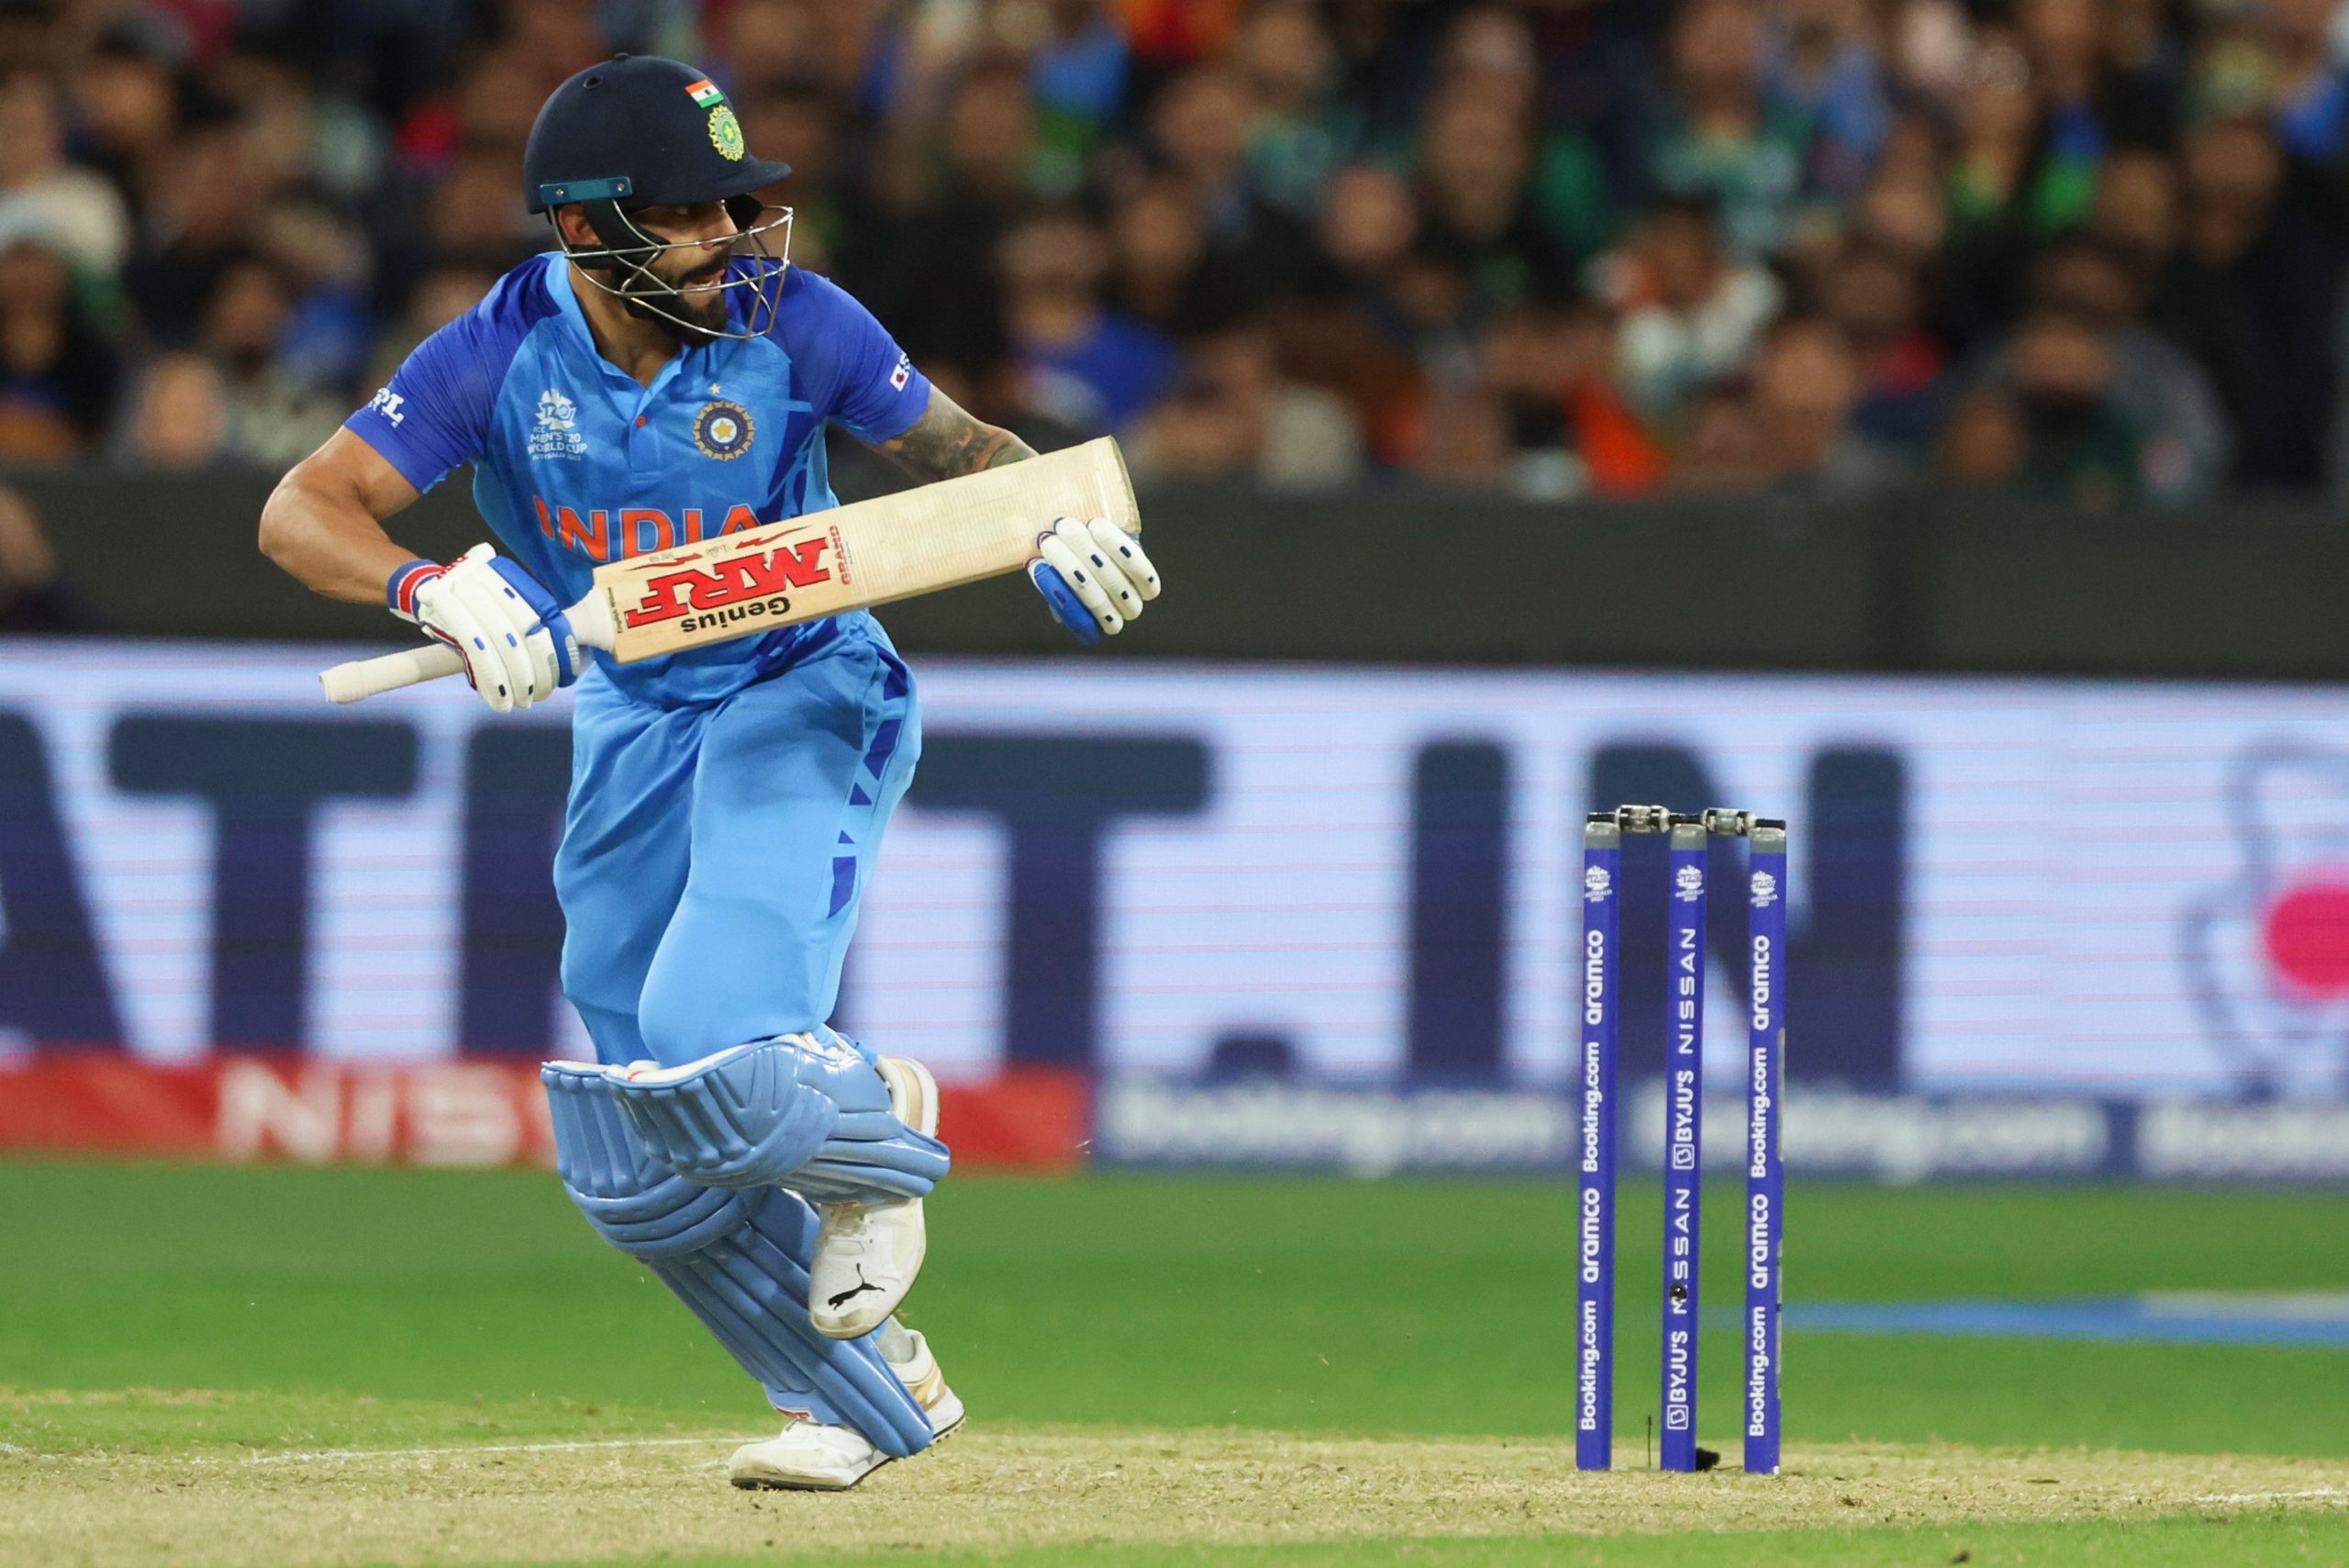 Kohli’s love affair with Adelaide continues: India batter plays stunning knock vs England